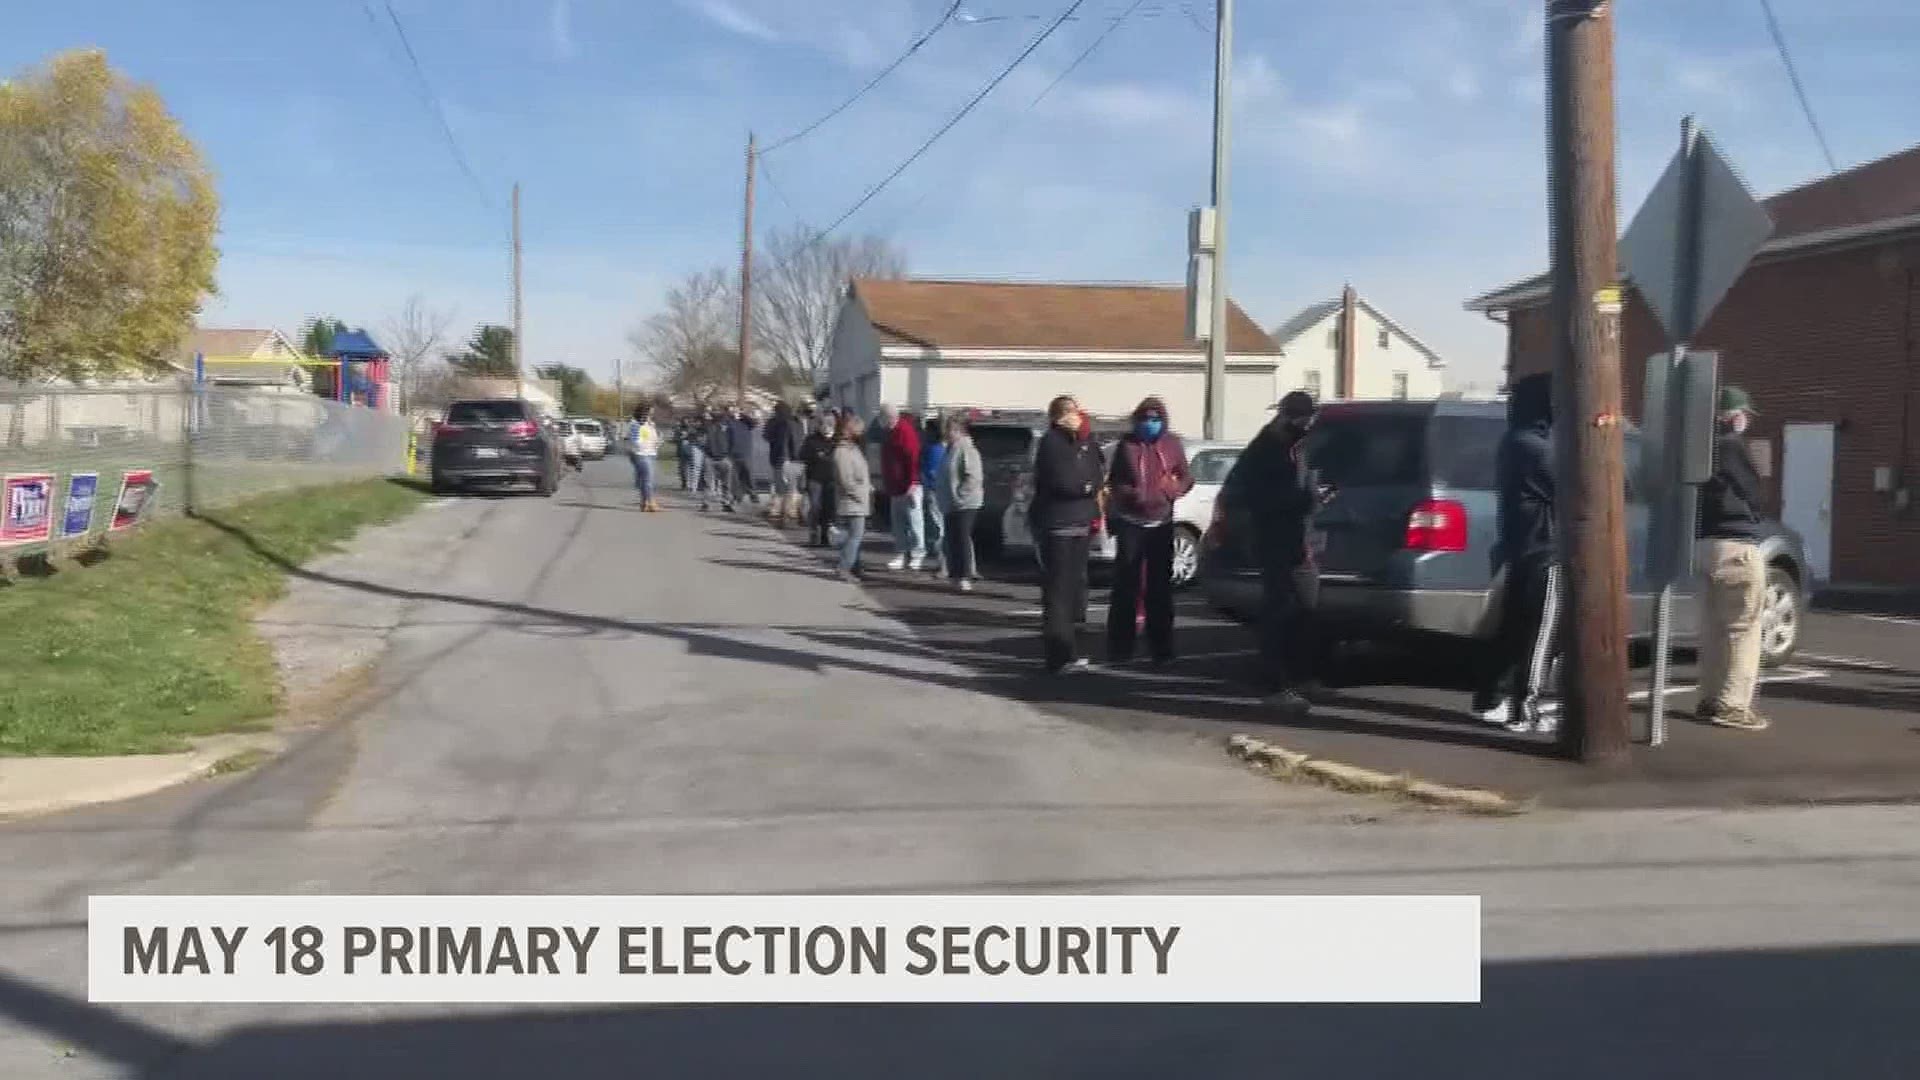 Officials consider election security ahead of May primary